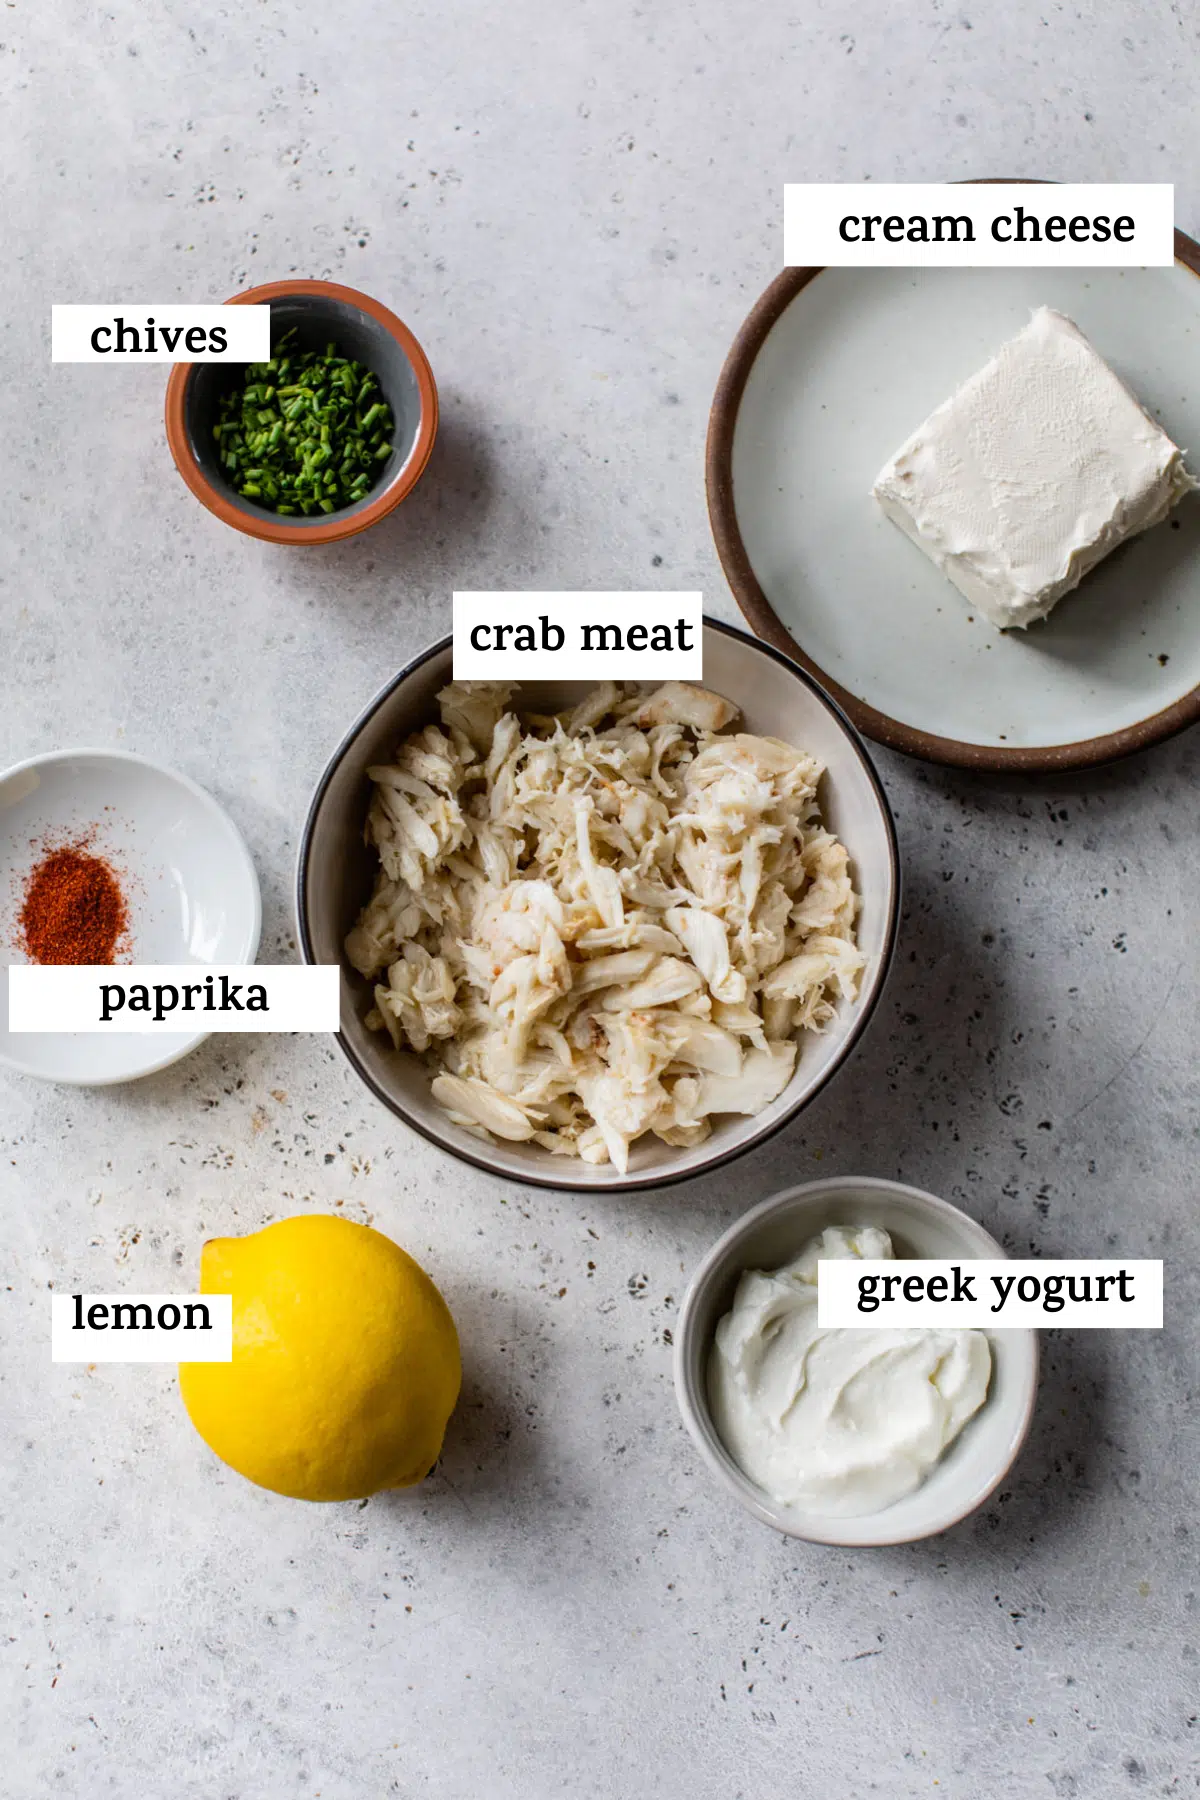 all ingredients on a table; chives, cream cheese, paprika, crab meat, lemon, and greek yogurt